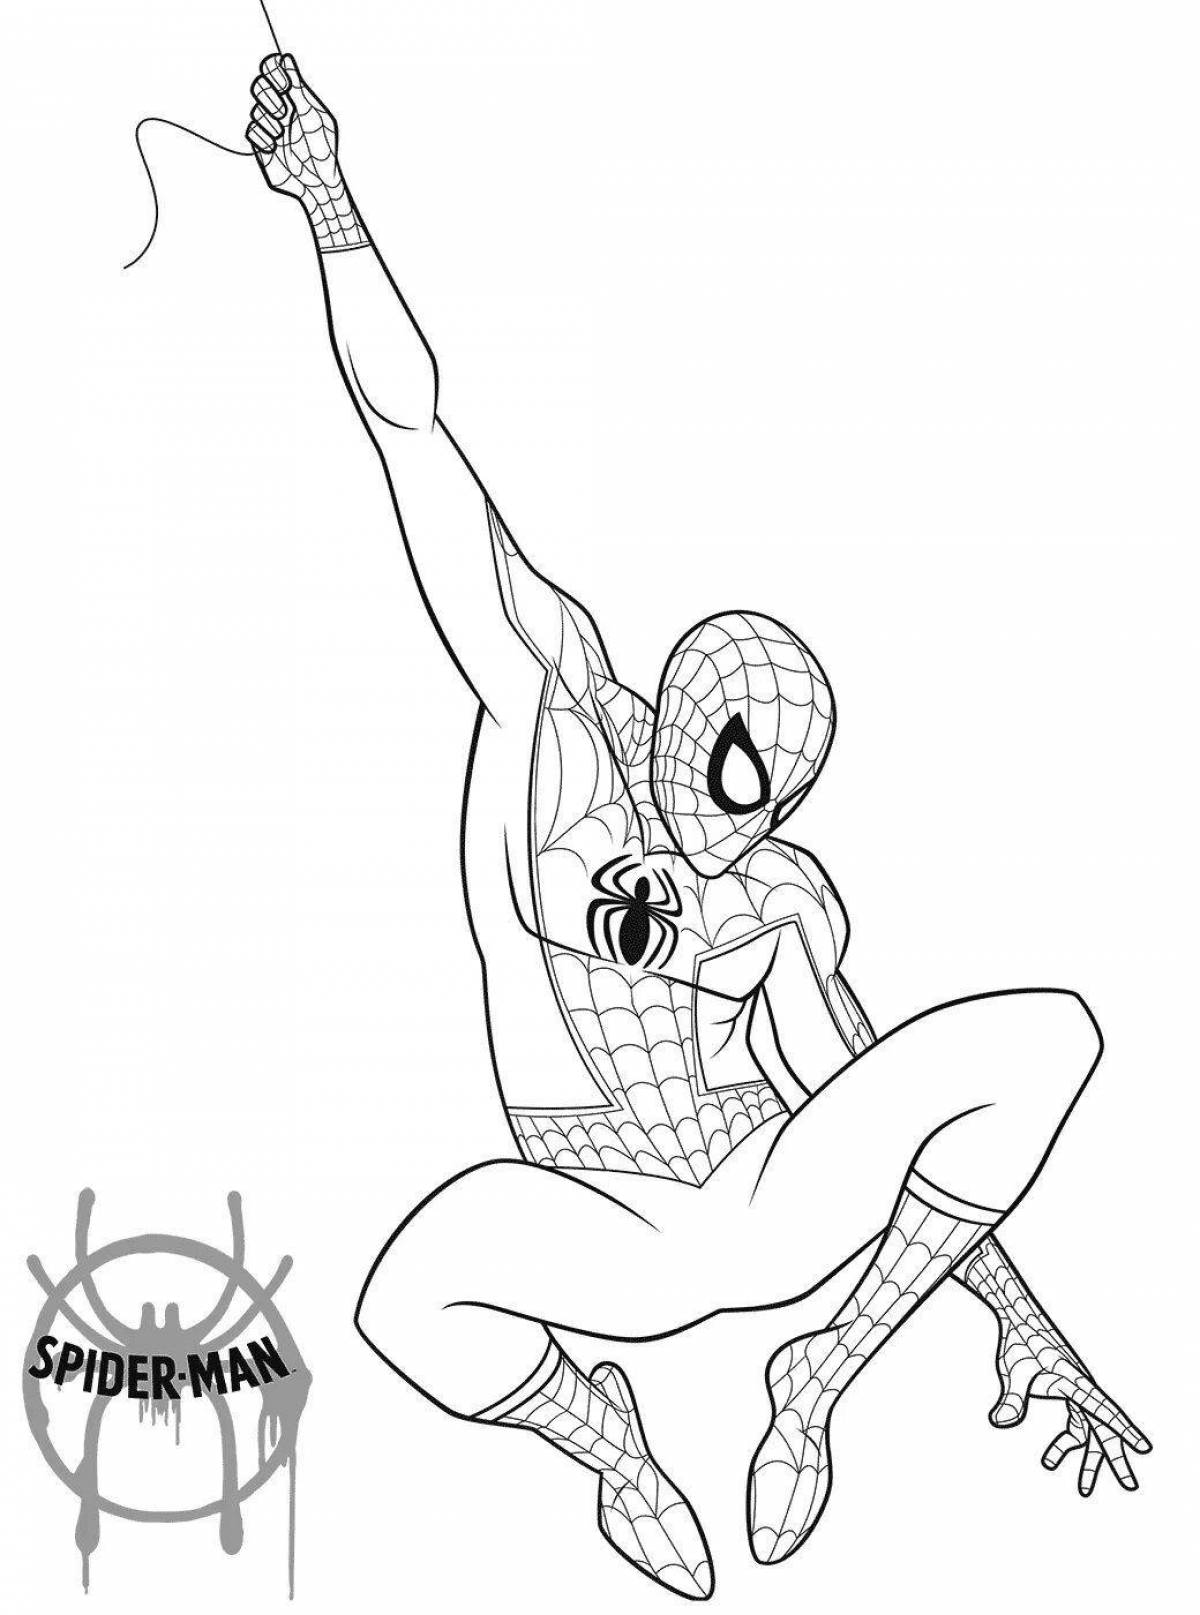 Happy new year spider-man coloring book